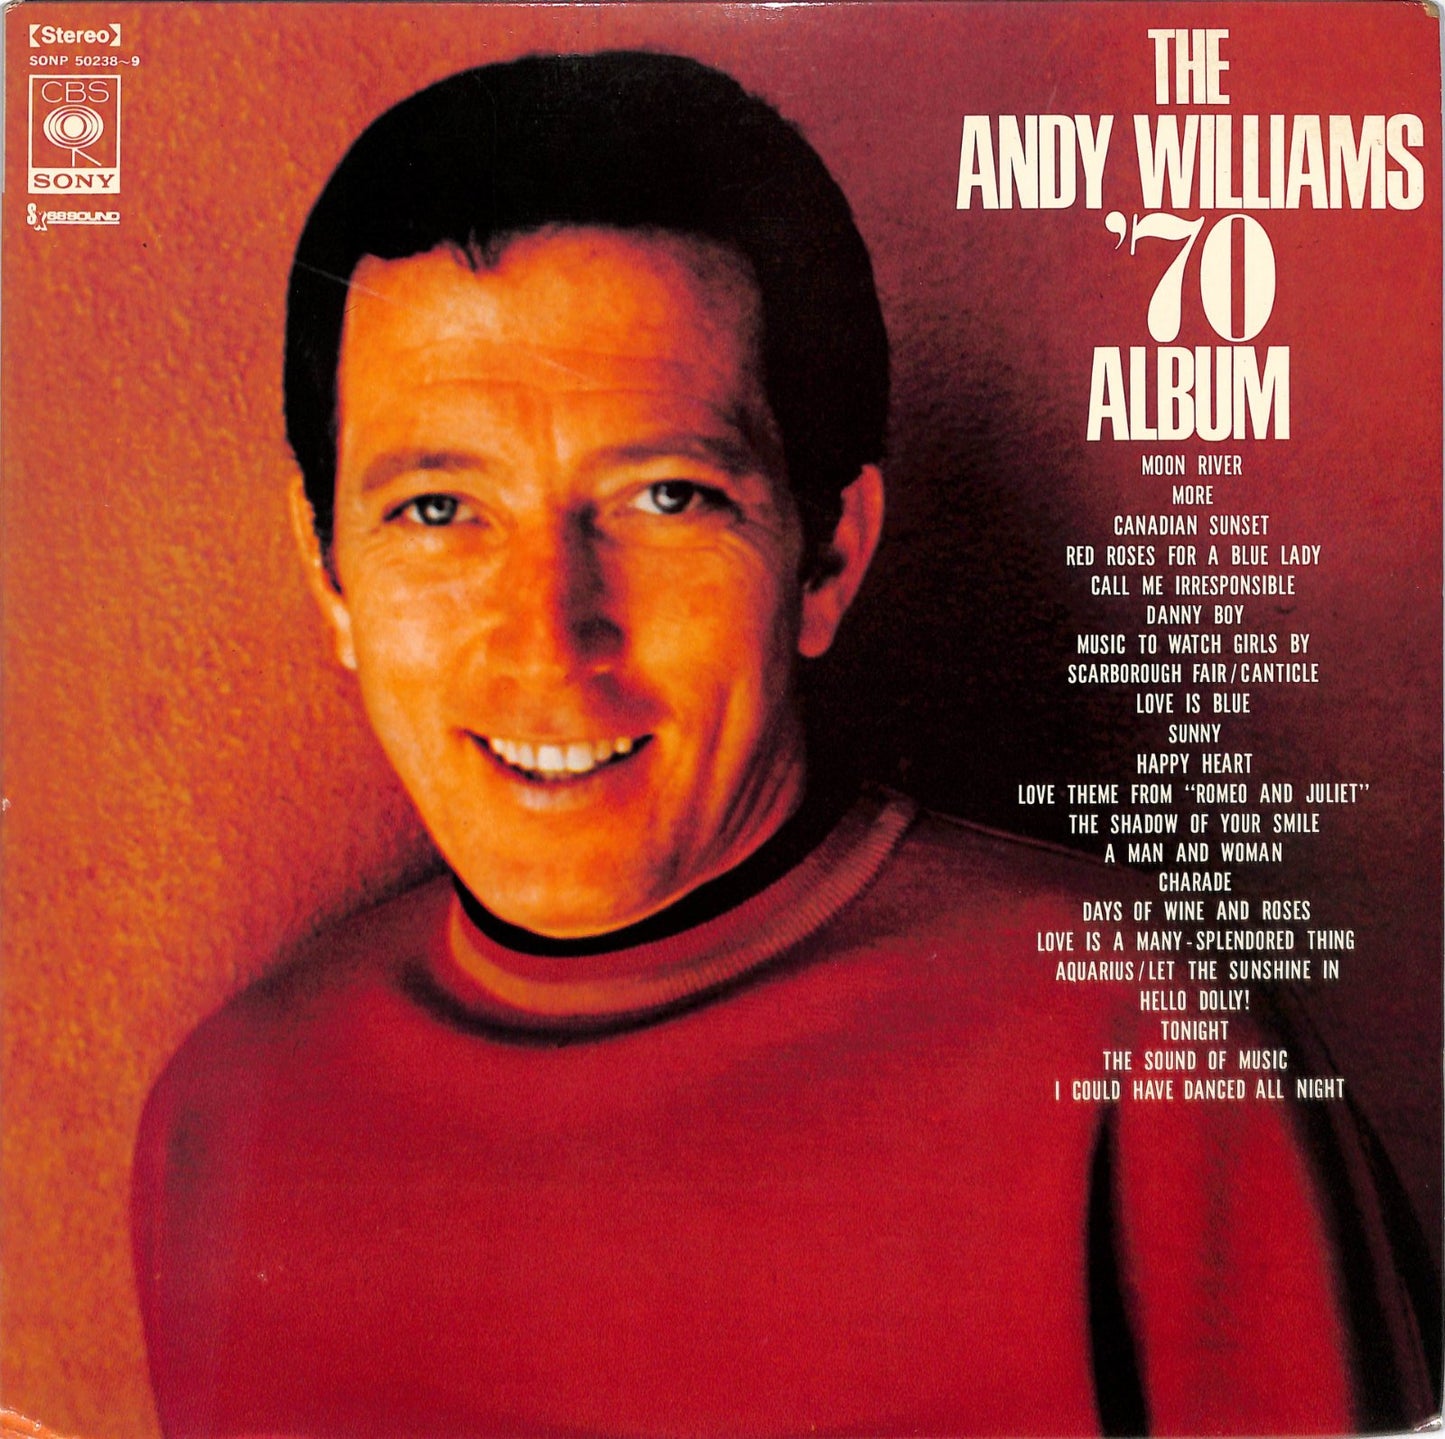 ANDY WILLIAMS - The Andy Williams '70 Album